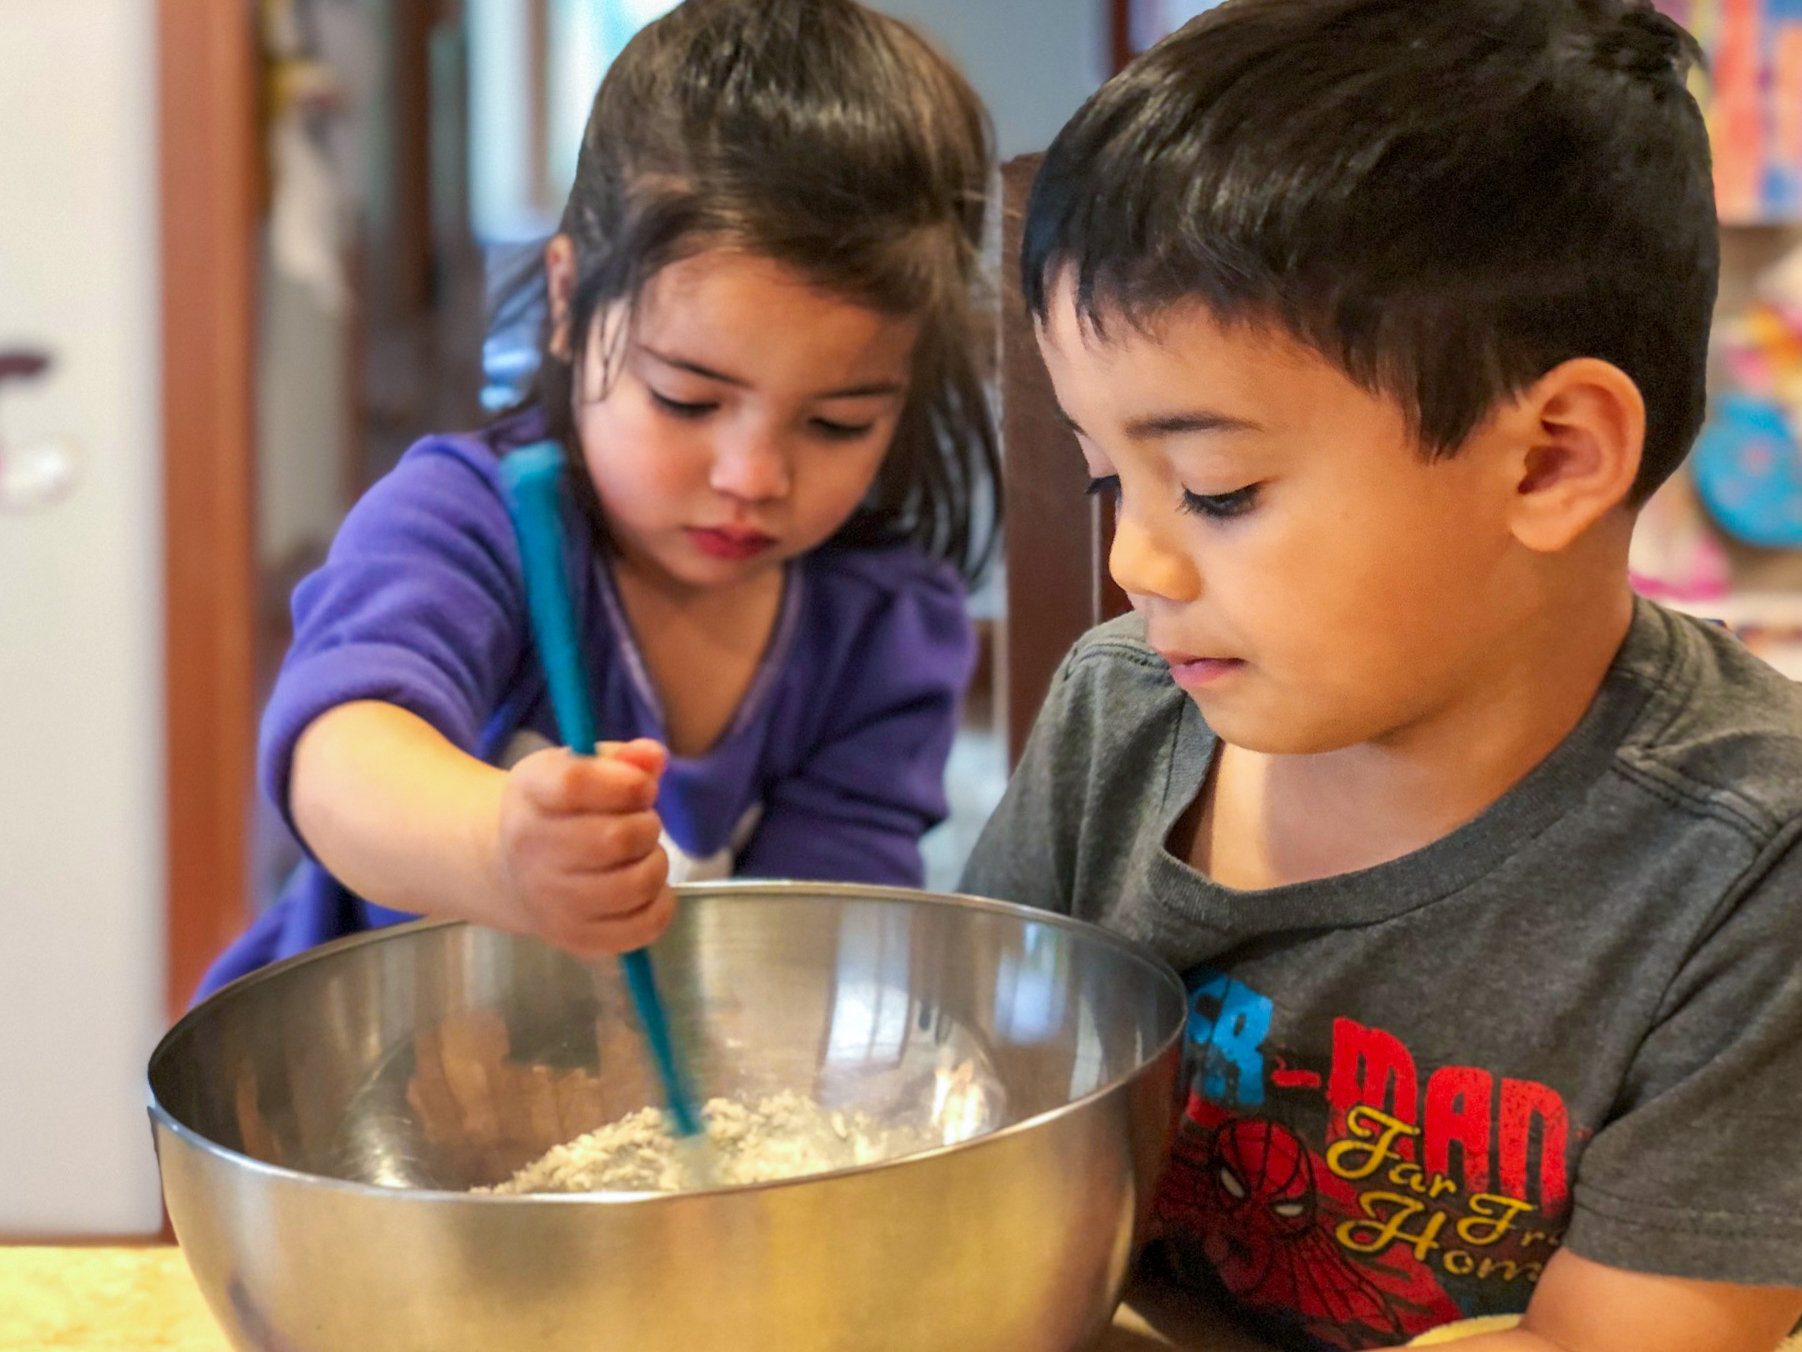 Two young children work together to stir a bowl of food